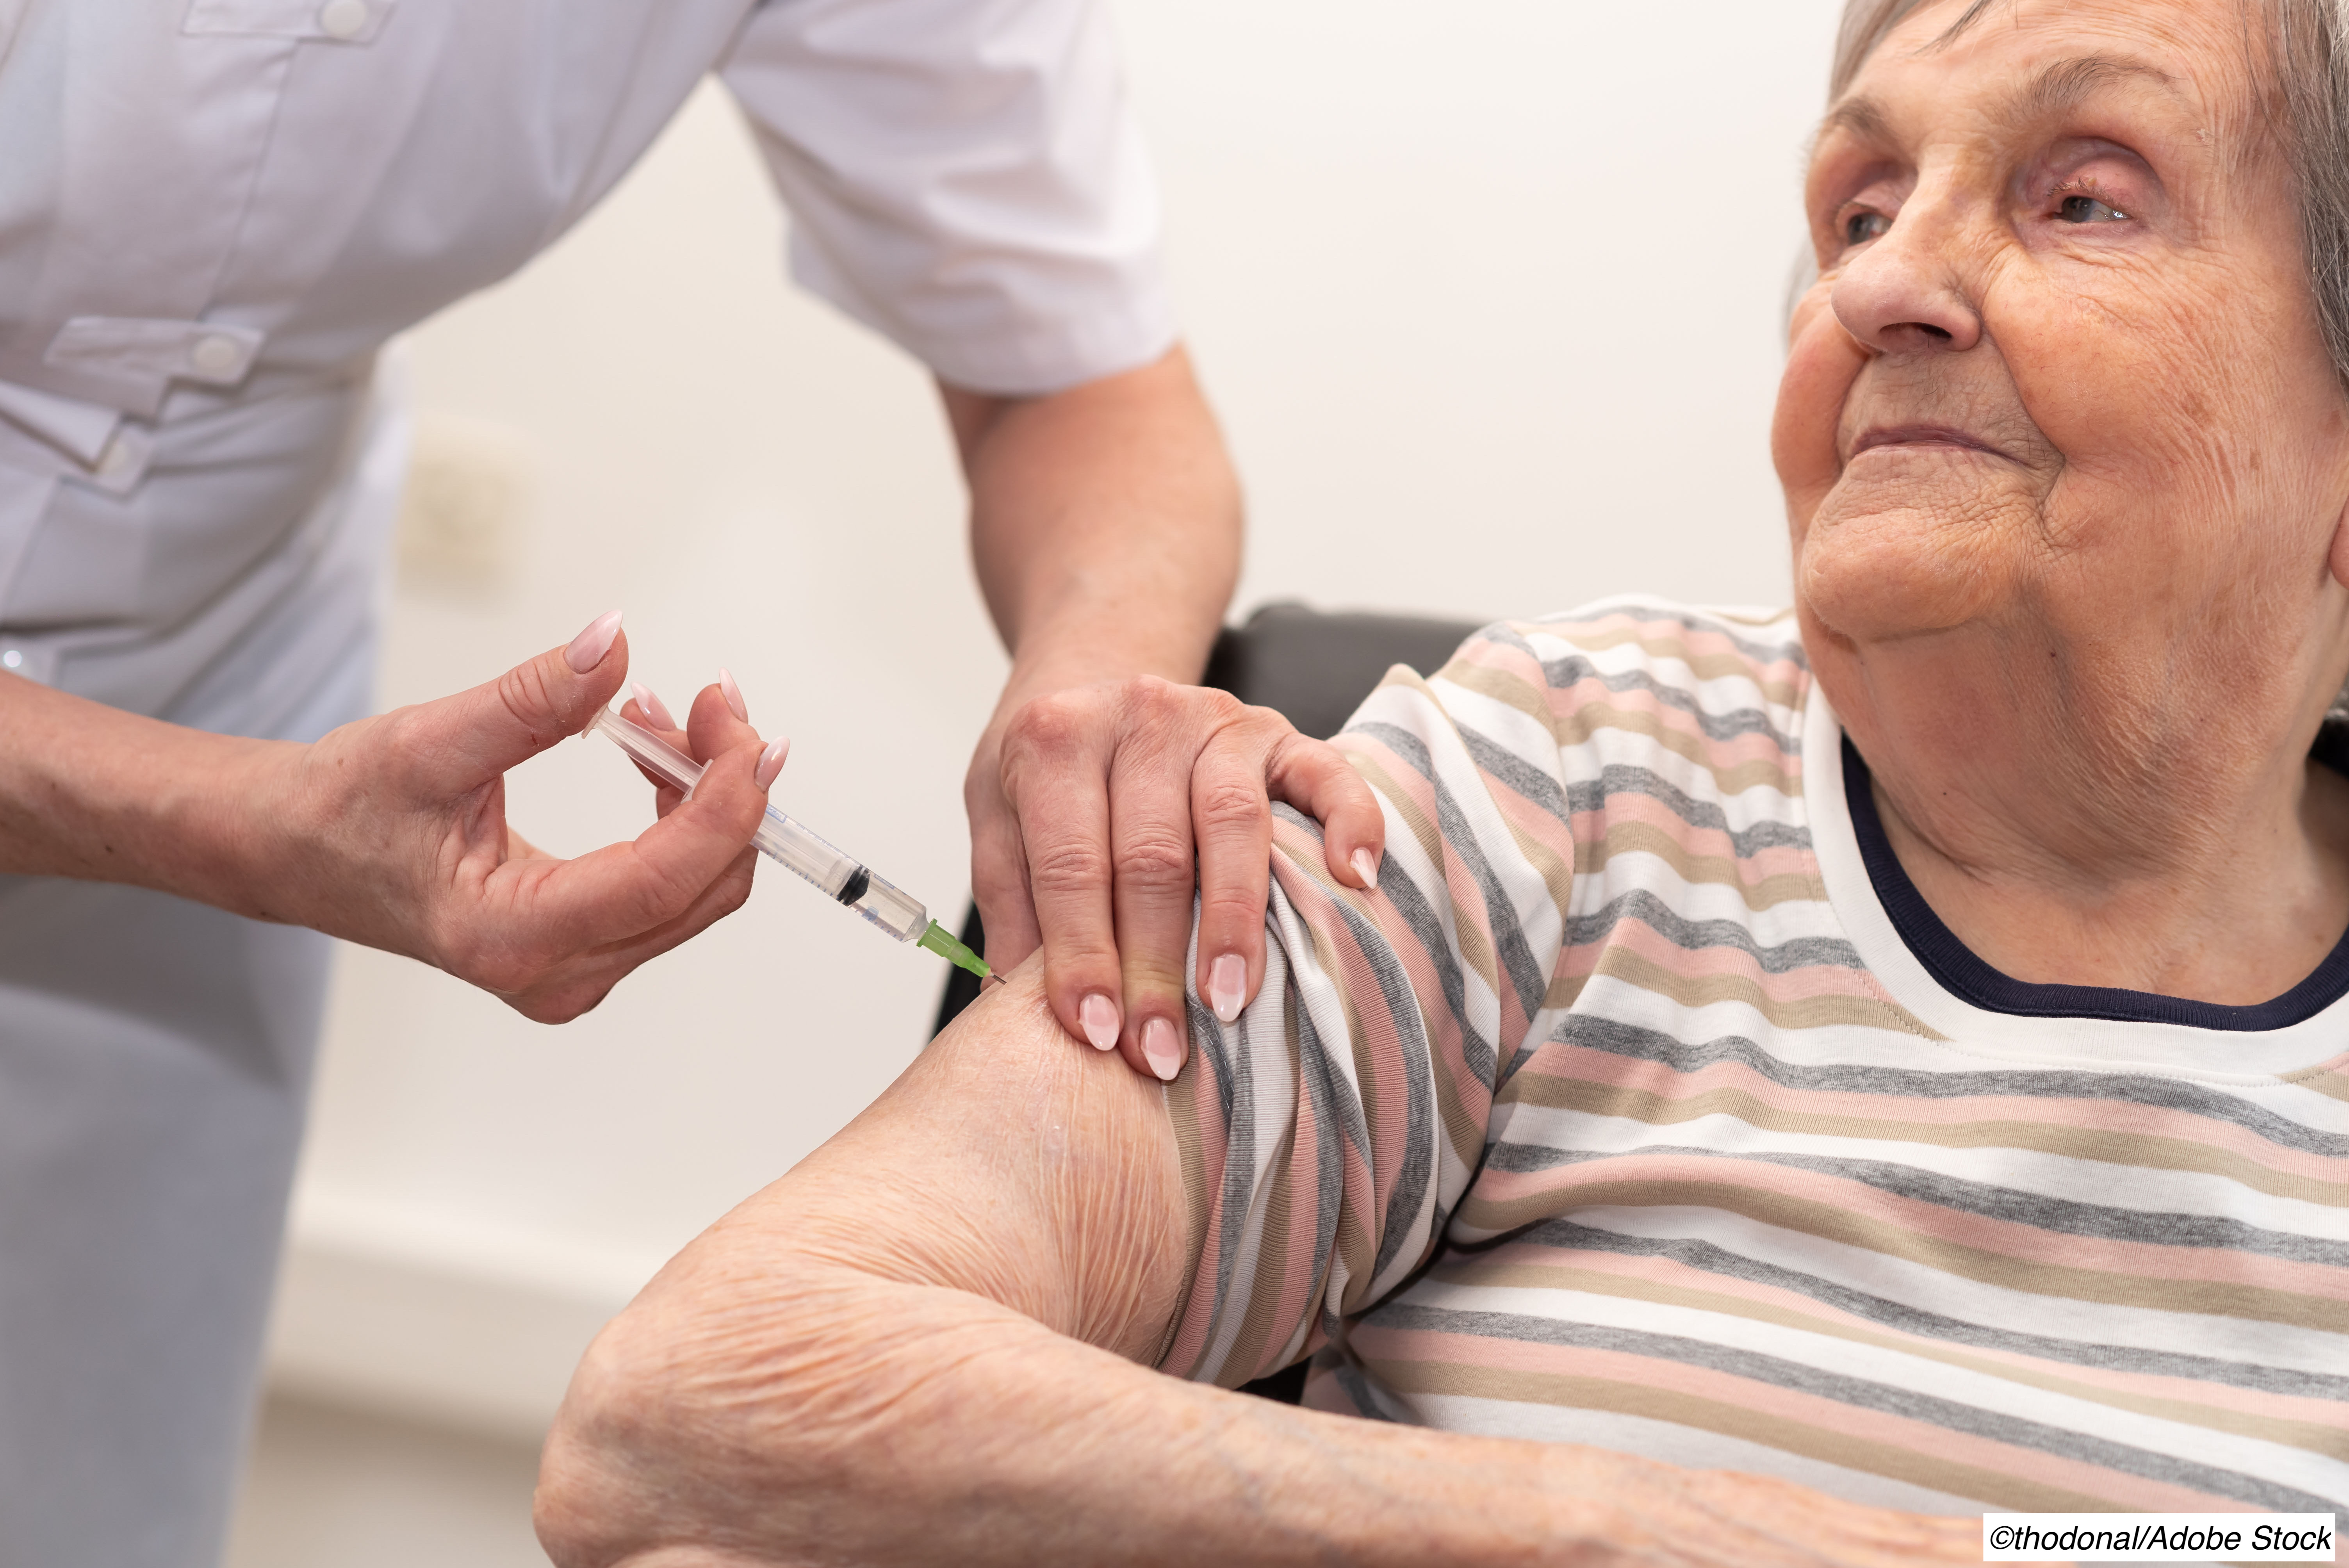 ACIP: Can High-Dose Flu Vaccines Better Protect Older Adults?